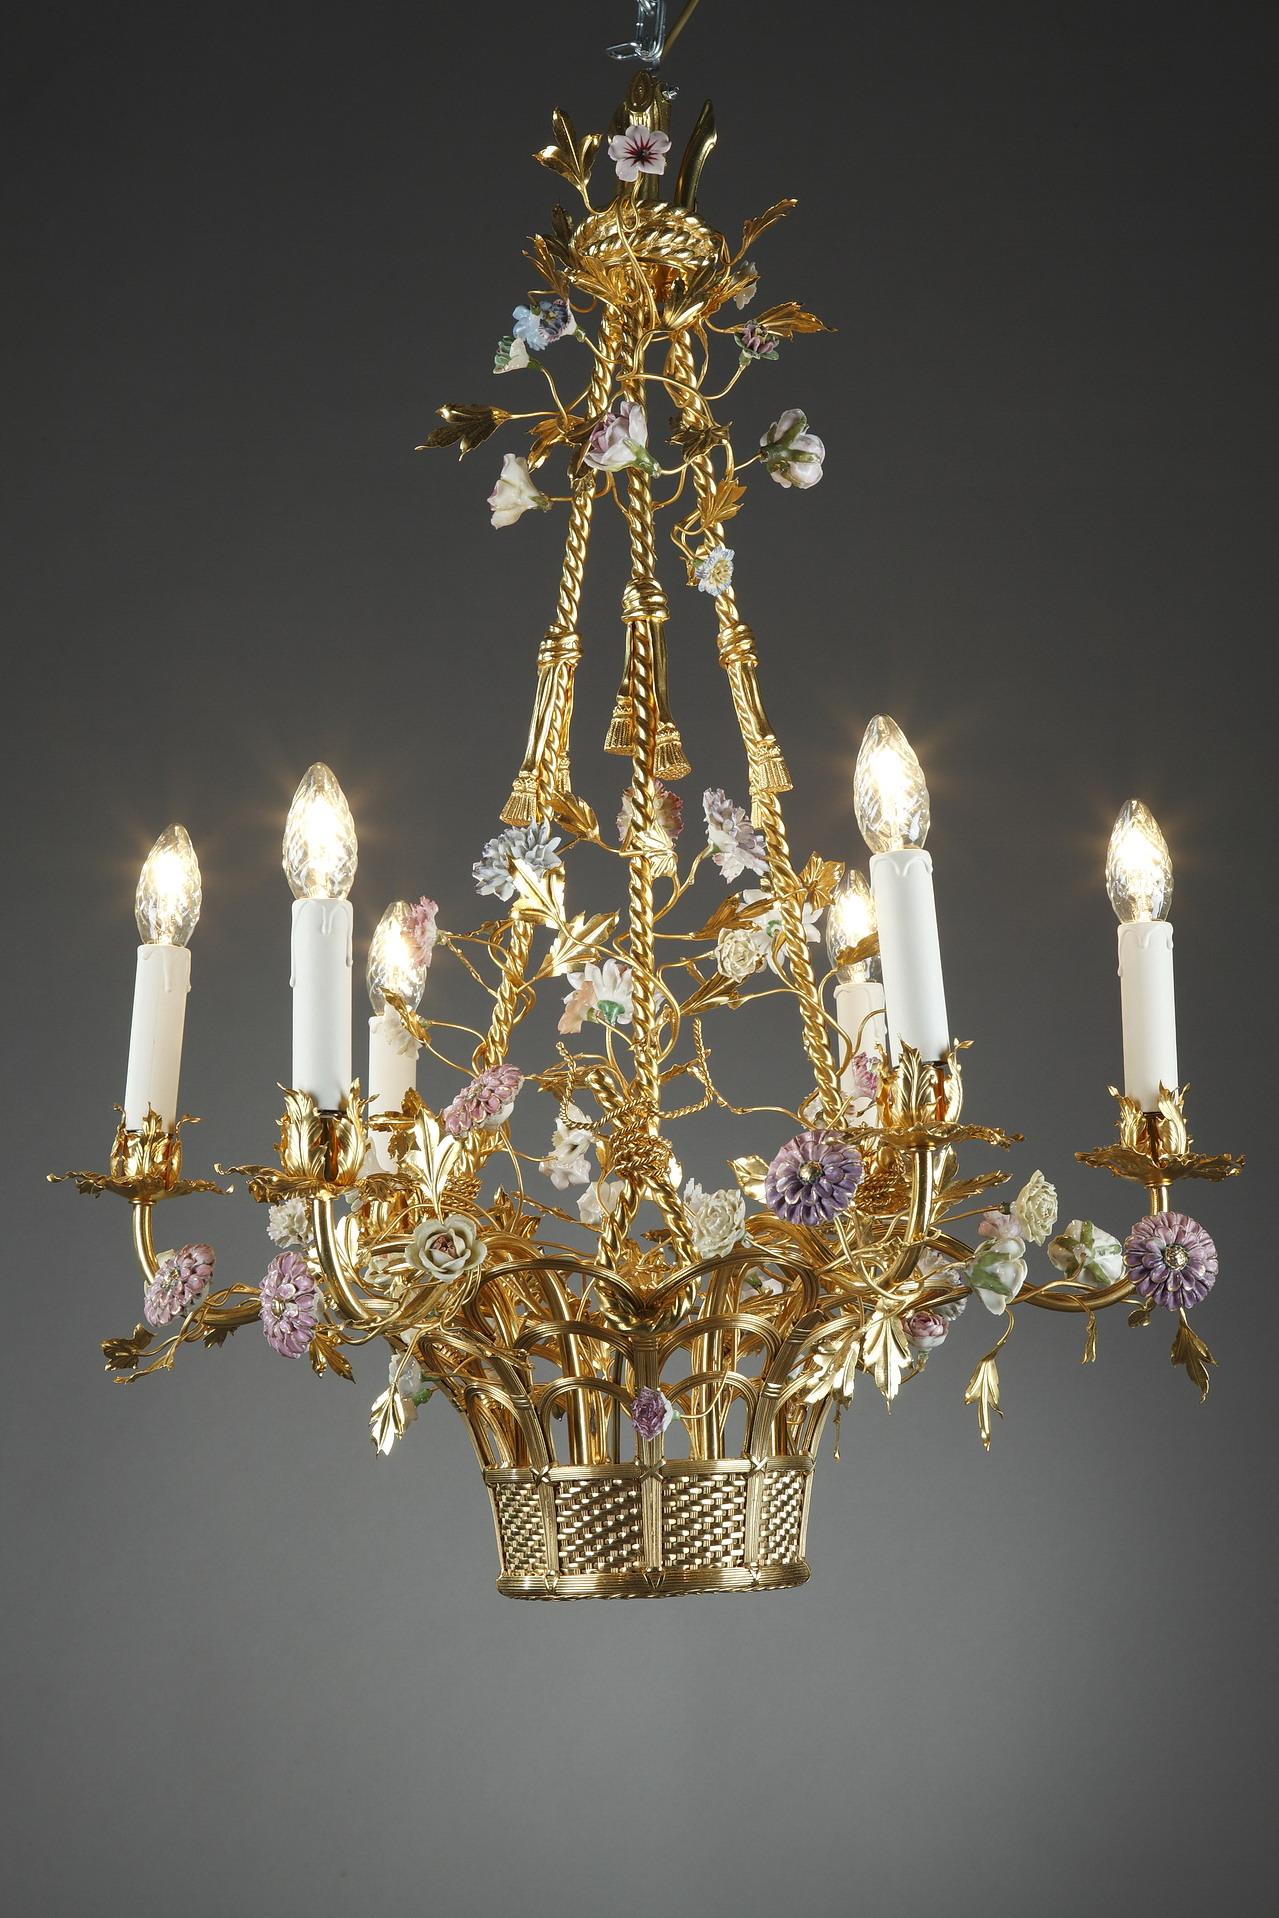 Napoleon III ormolu chandelier in Rococo style. The six arms of light coil out from an over-flowing basket of flowers, crafted in porcelain in the taste of Meissen manufactory. The stunning symphony of flowers and flourishes accentuate the basket